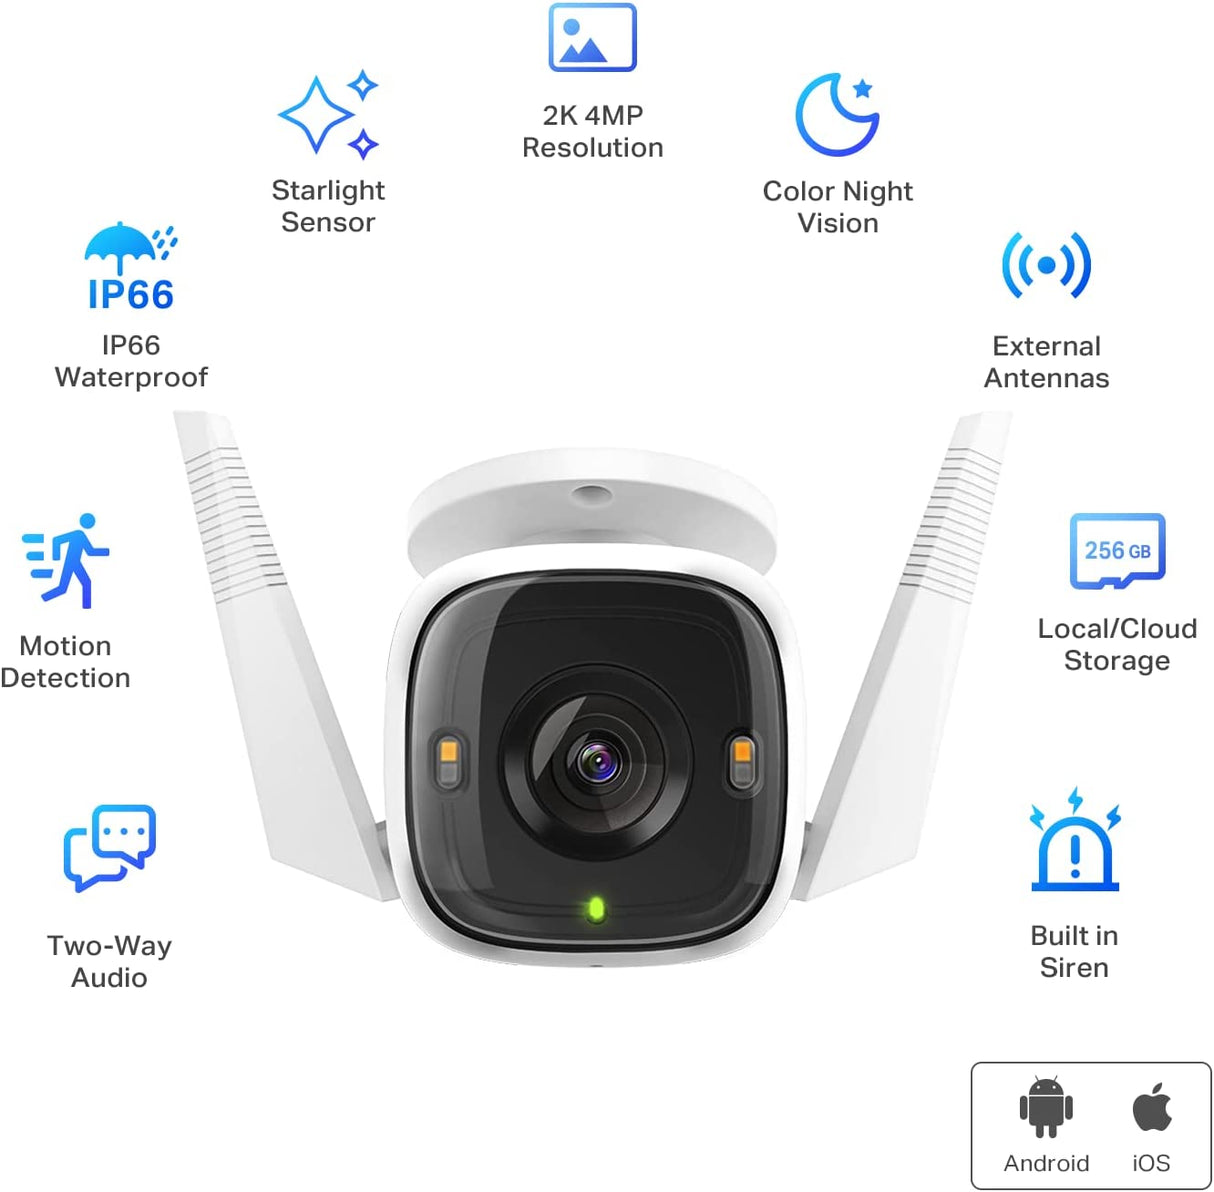 TP-Link Tapo 2K 4MP QHD Security Camera Outdoor Wired, IP66 Weatherproof, Motion/Person Detection, Works with Alexa &amp; Google Home, Built-in Siren, Night Vision, Cloud/SD Card Storage (Tapo C320WS) 2K w/ Starlight Sensor